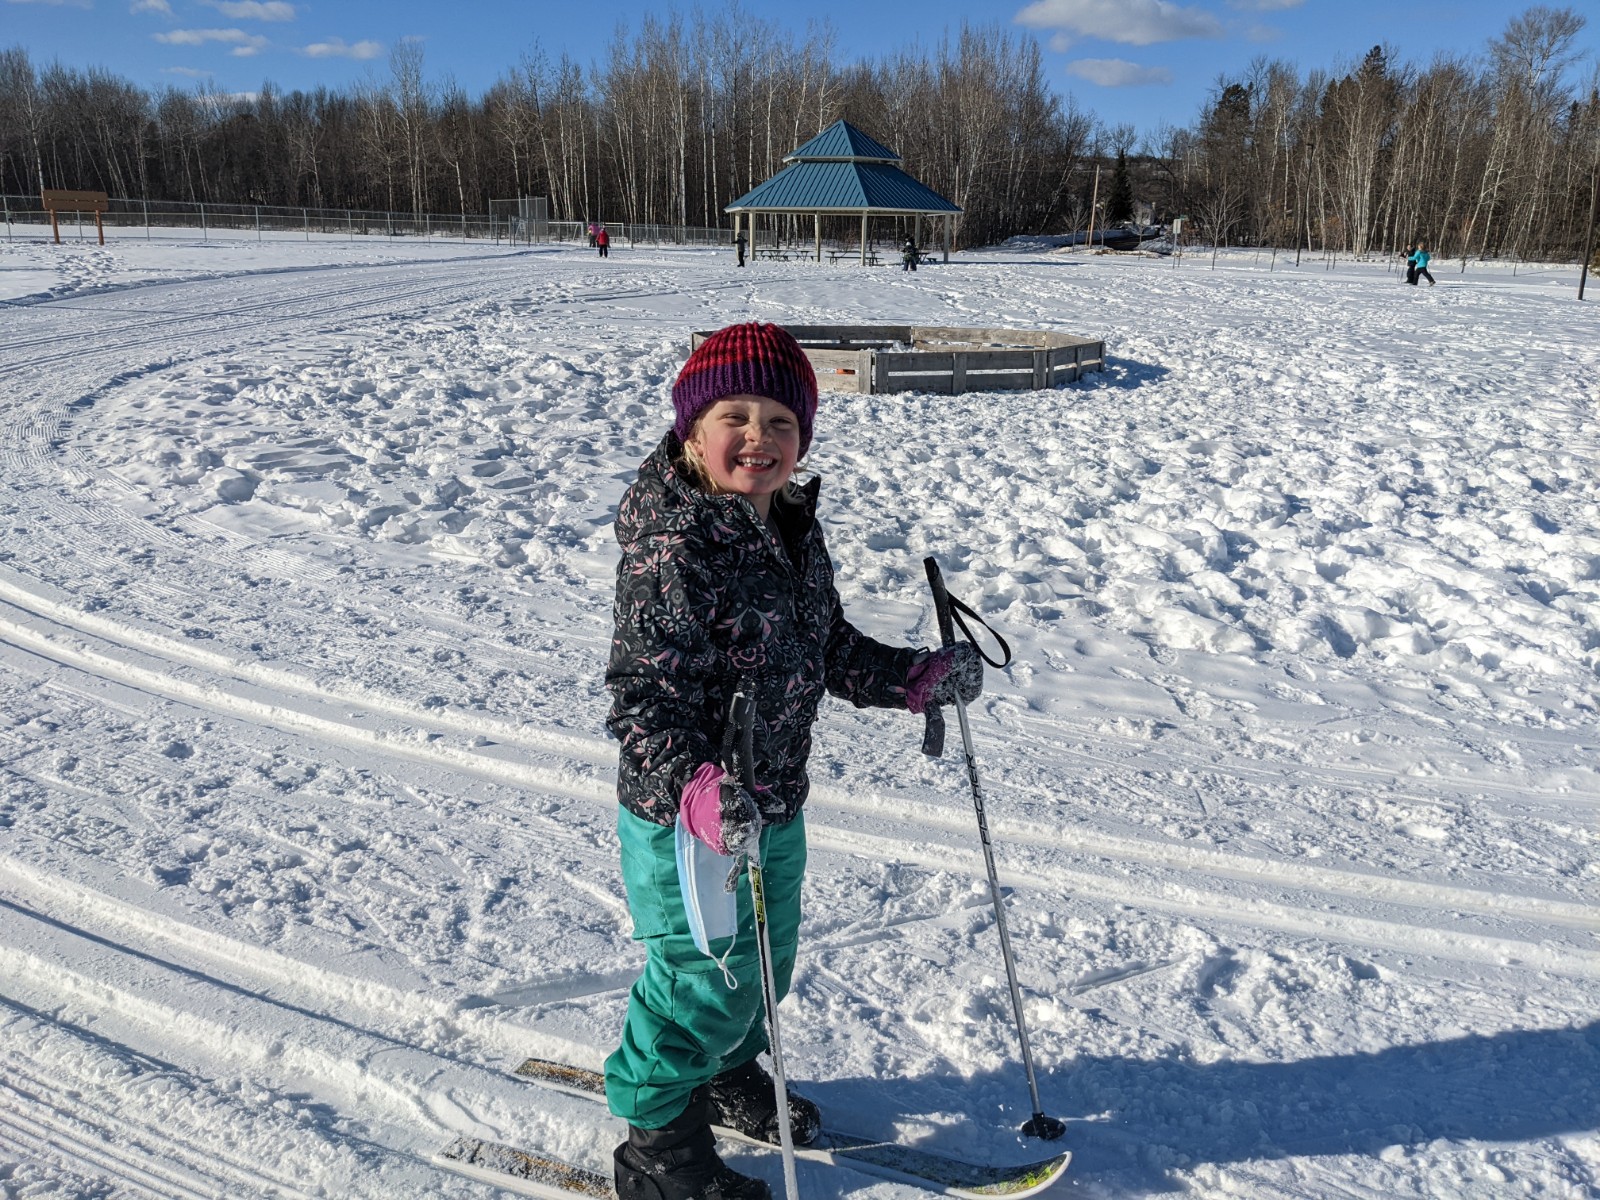 A young girl smiles while cross country skiing by the Pavilion at the GND REC